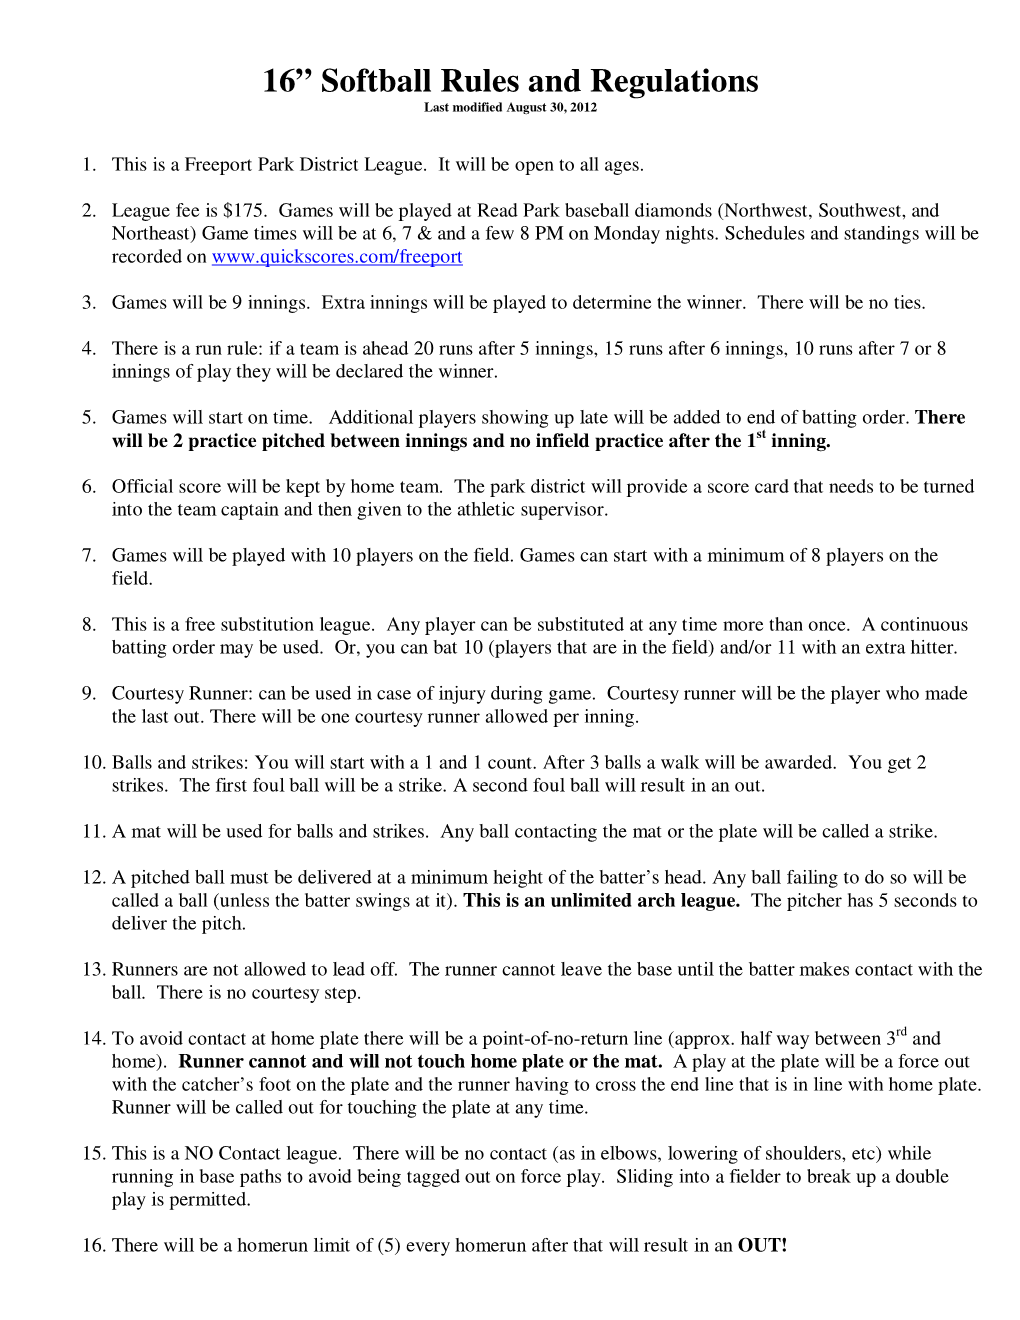 16” Softball Rules and Regulations Last Modified August 30, 2012